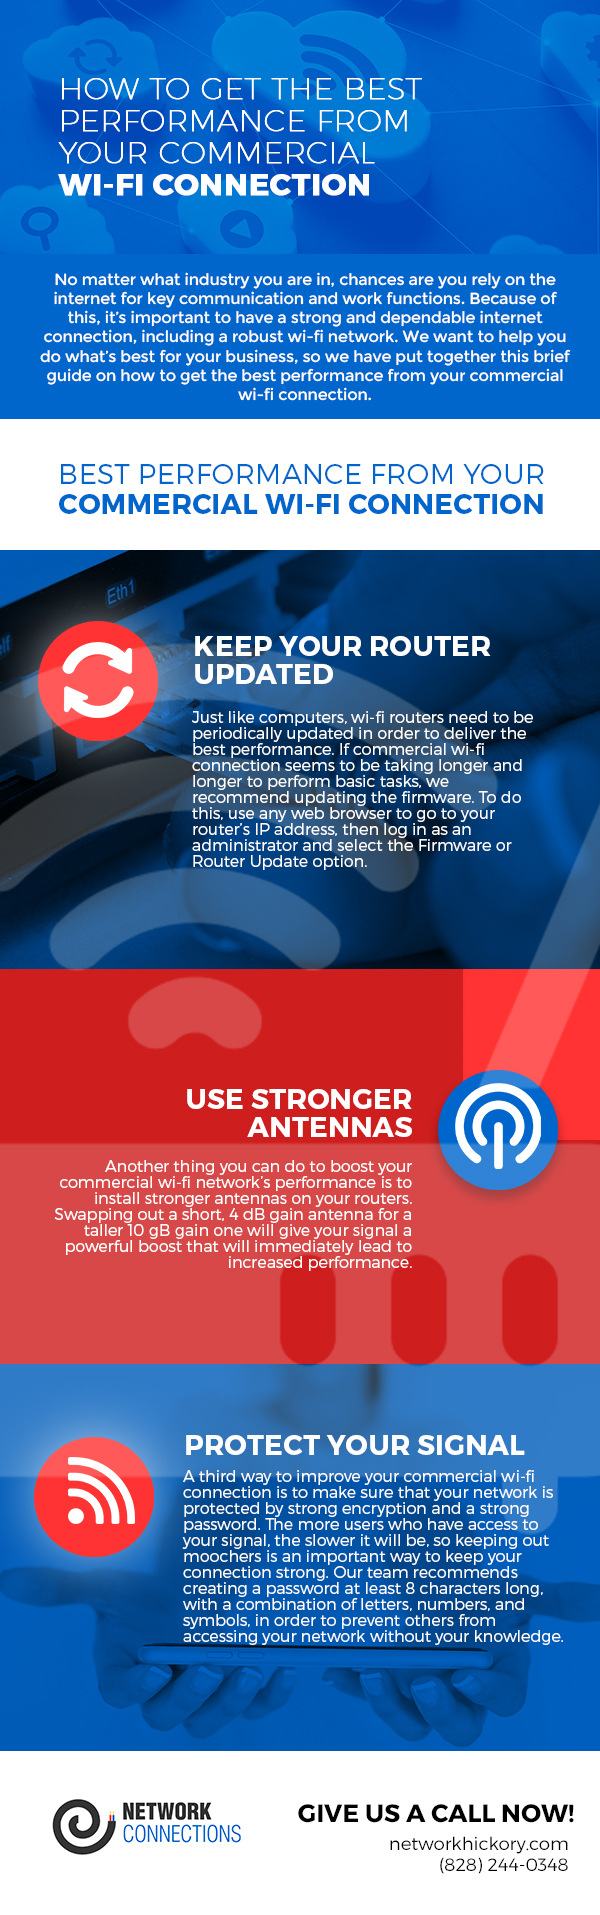 How to Get the Best Performance from Your Commercial Wi-Fi Connection [Infographic]